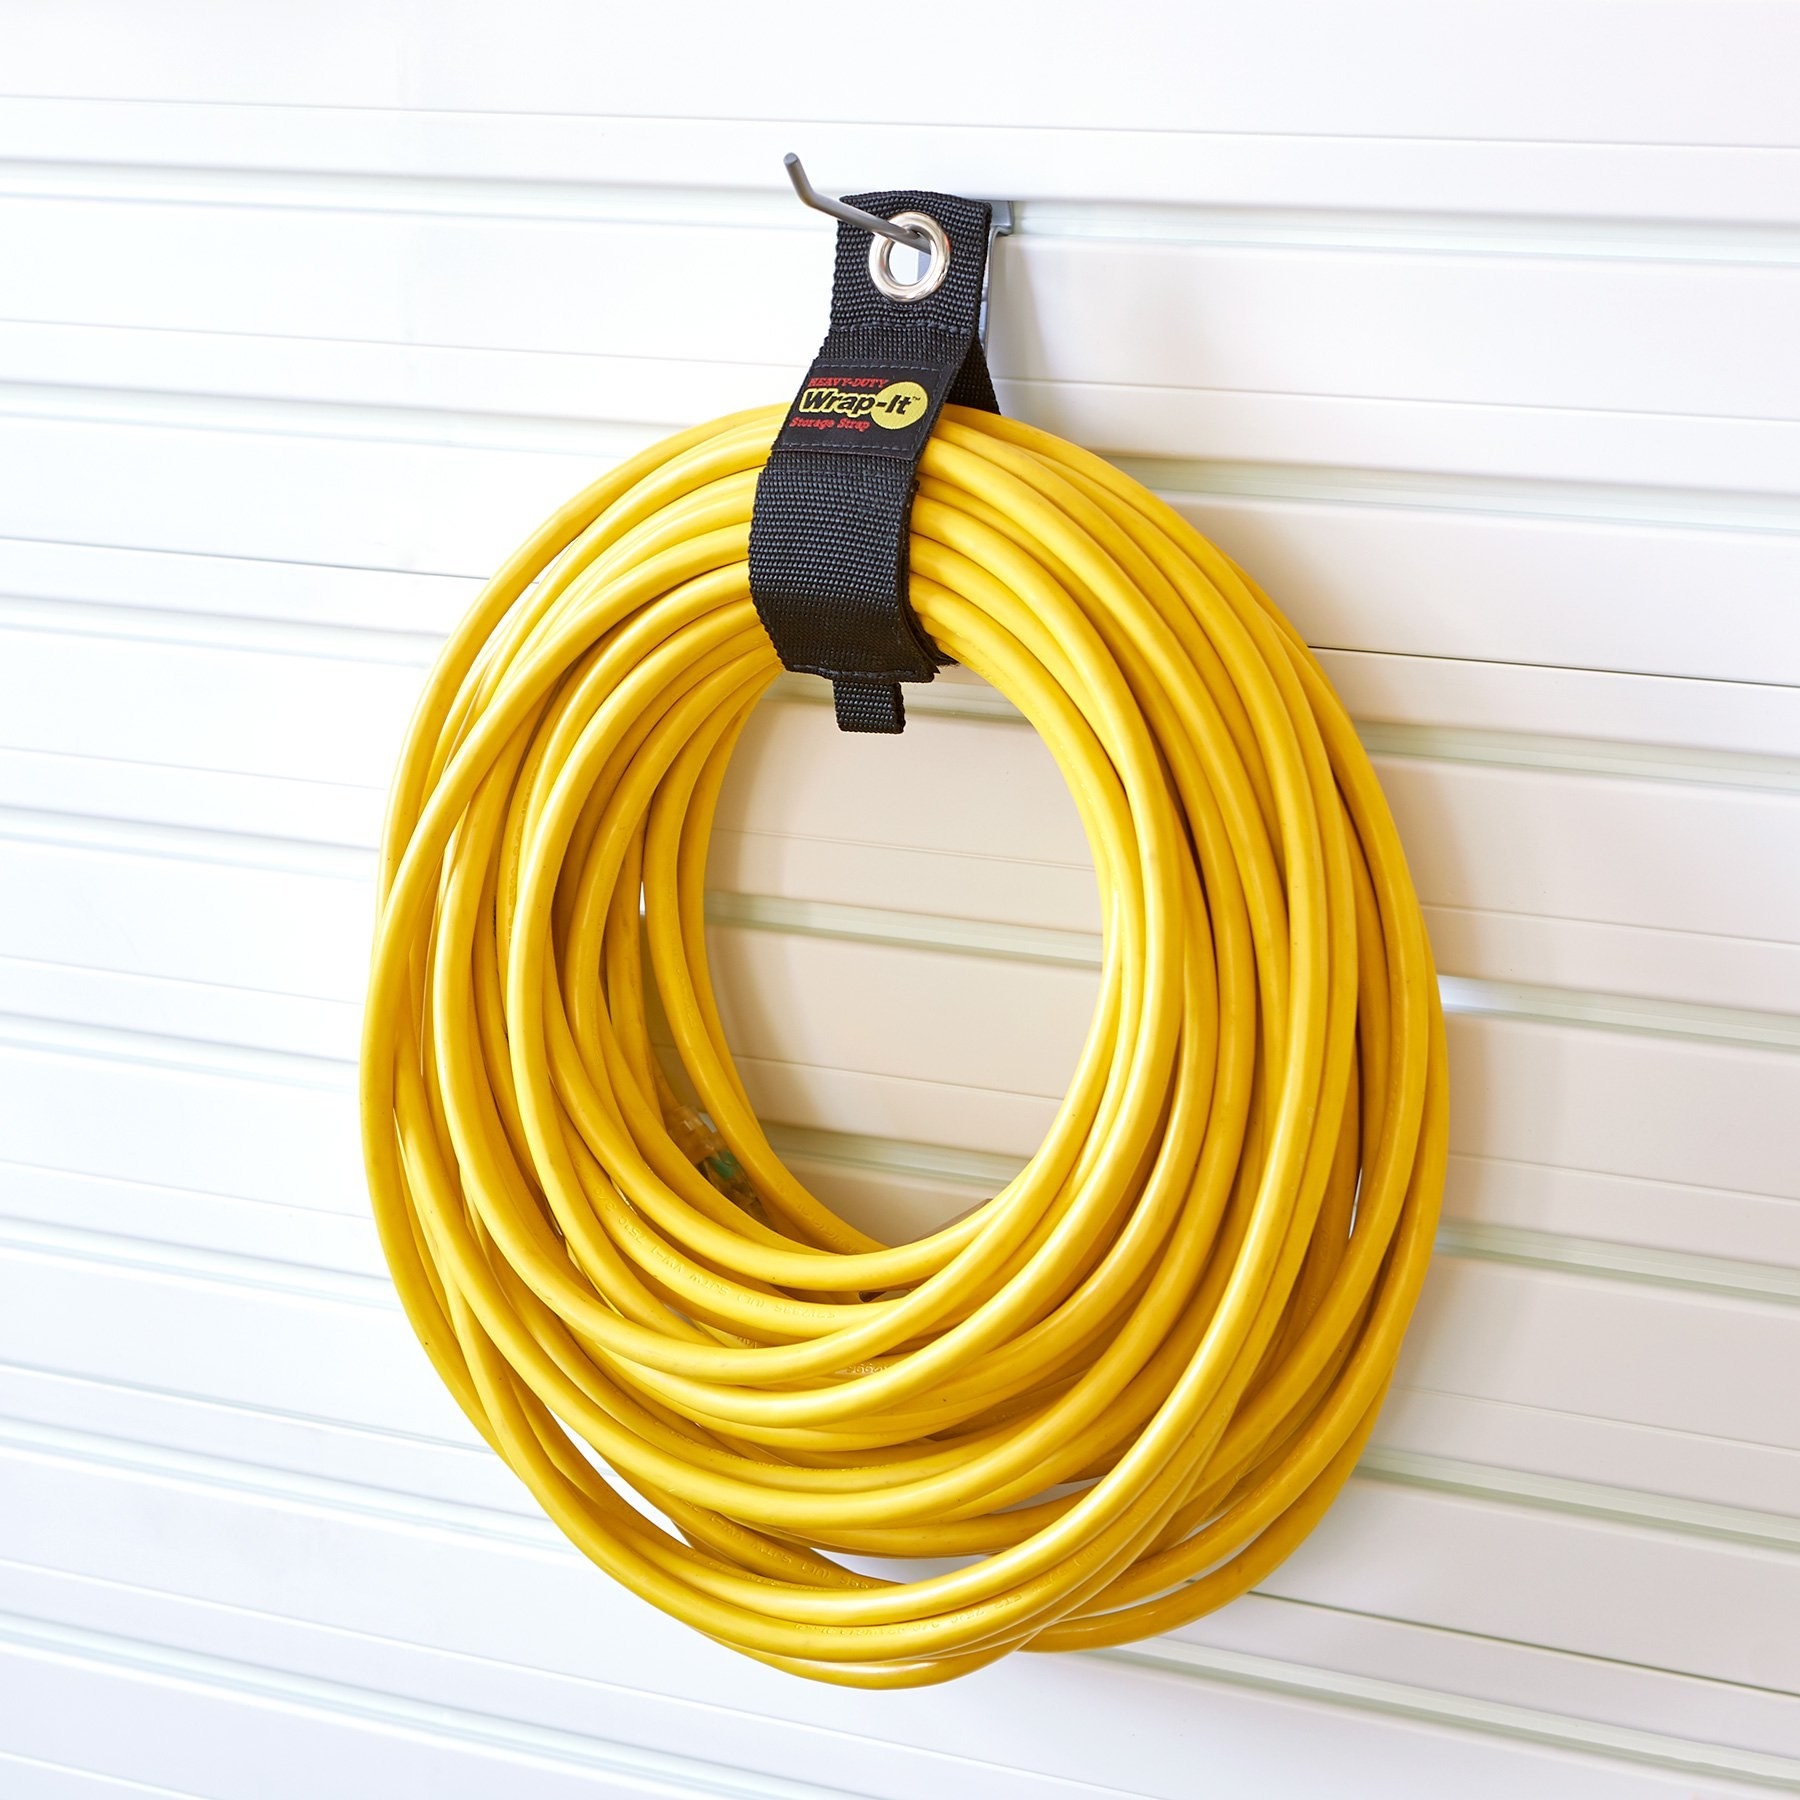 black wire wrap holding up a yellow extension cord hanging up on a wall